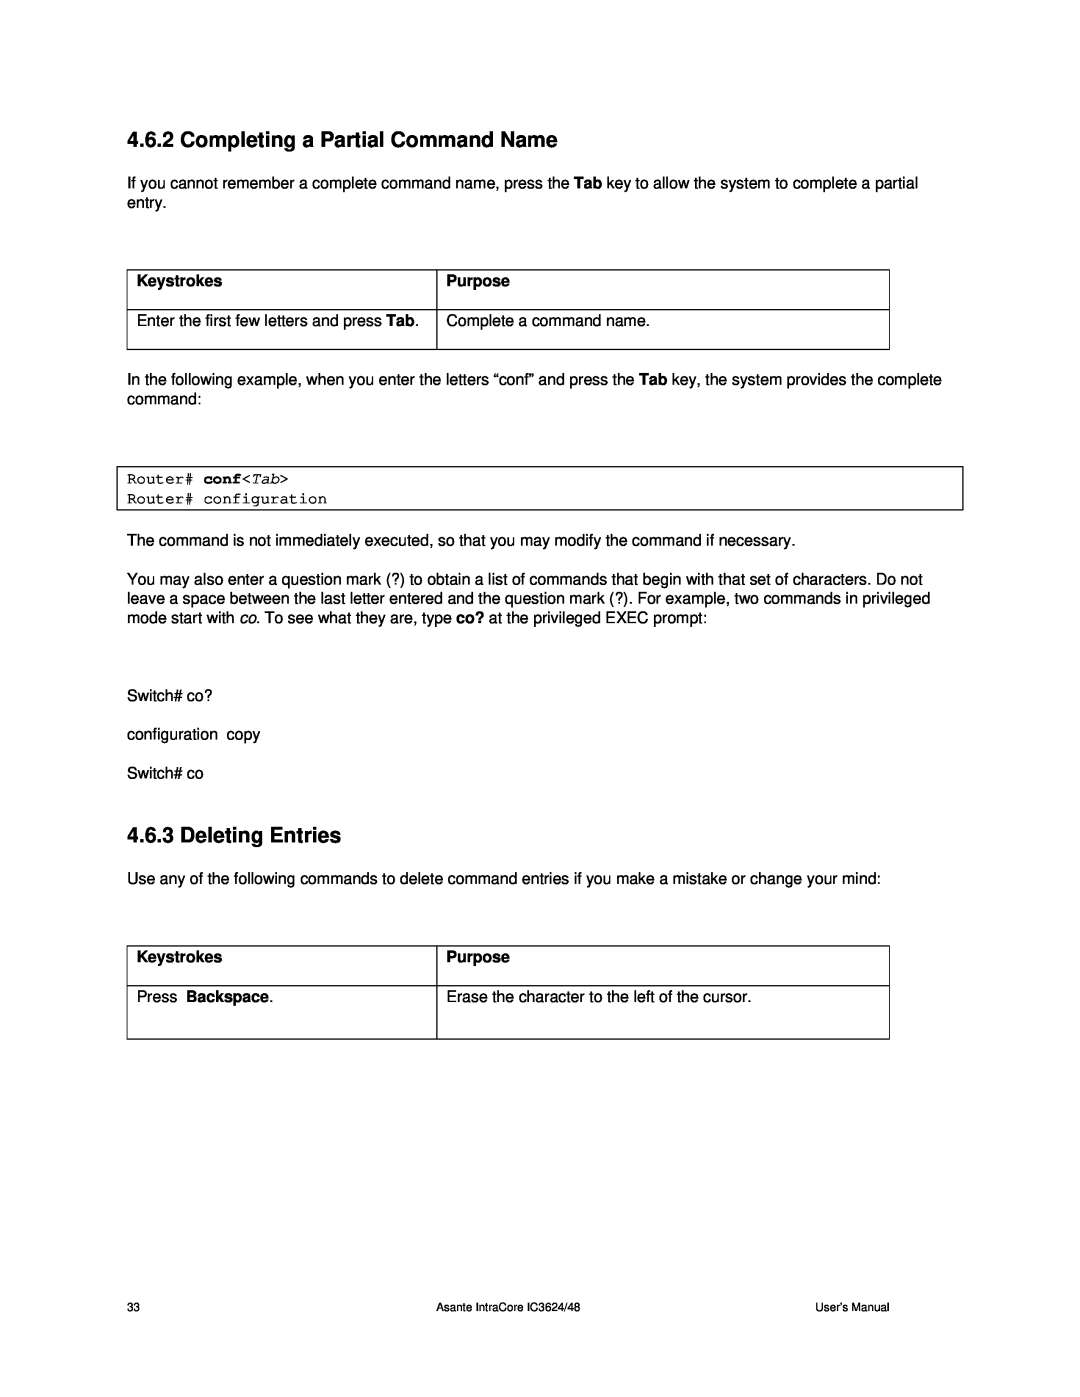 Asante Technologies 3624/48 user manual Completing a Partial Command Name, Deleting Entries 